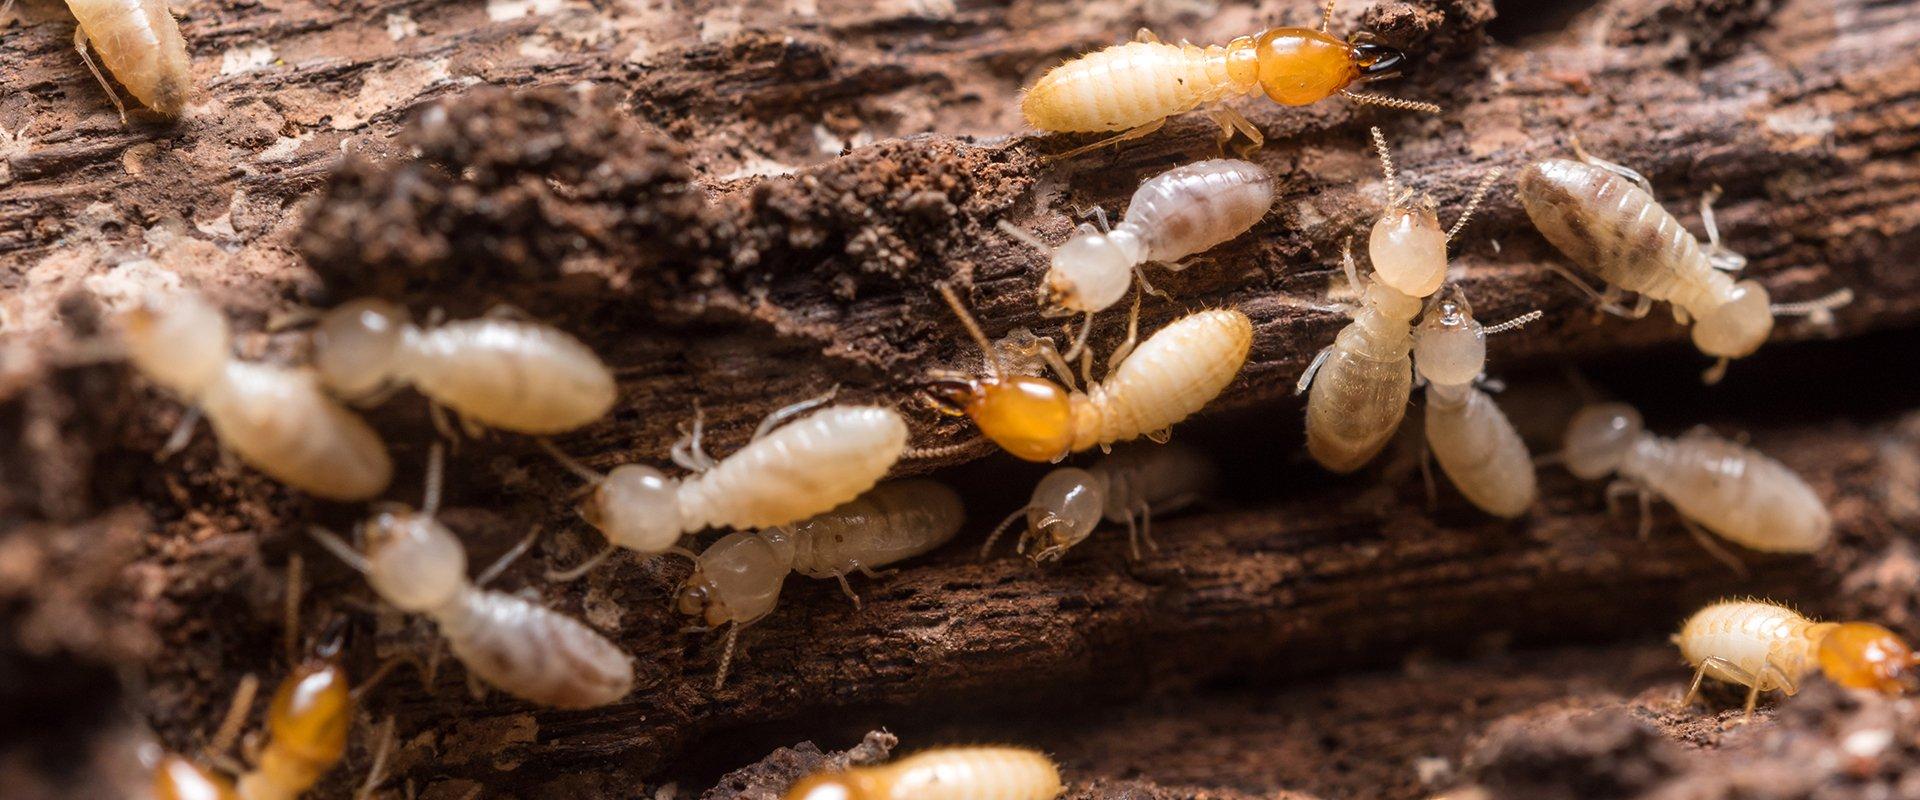 a group of many termites